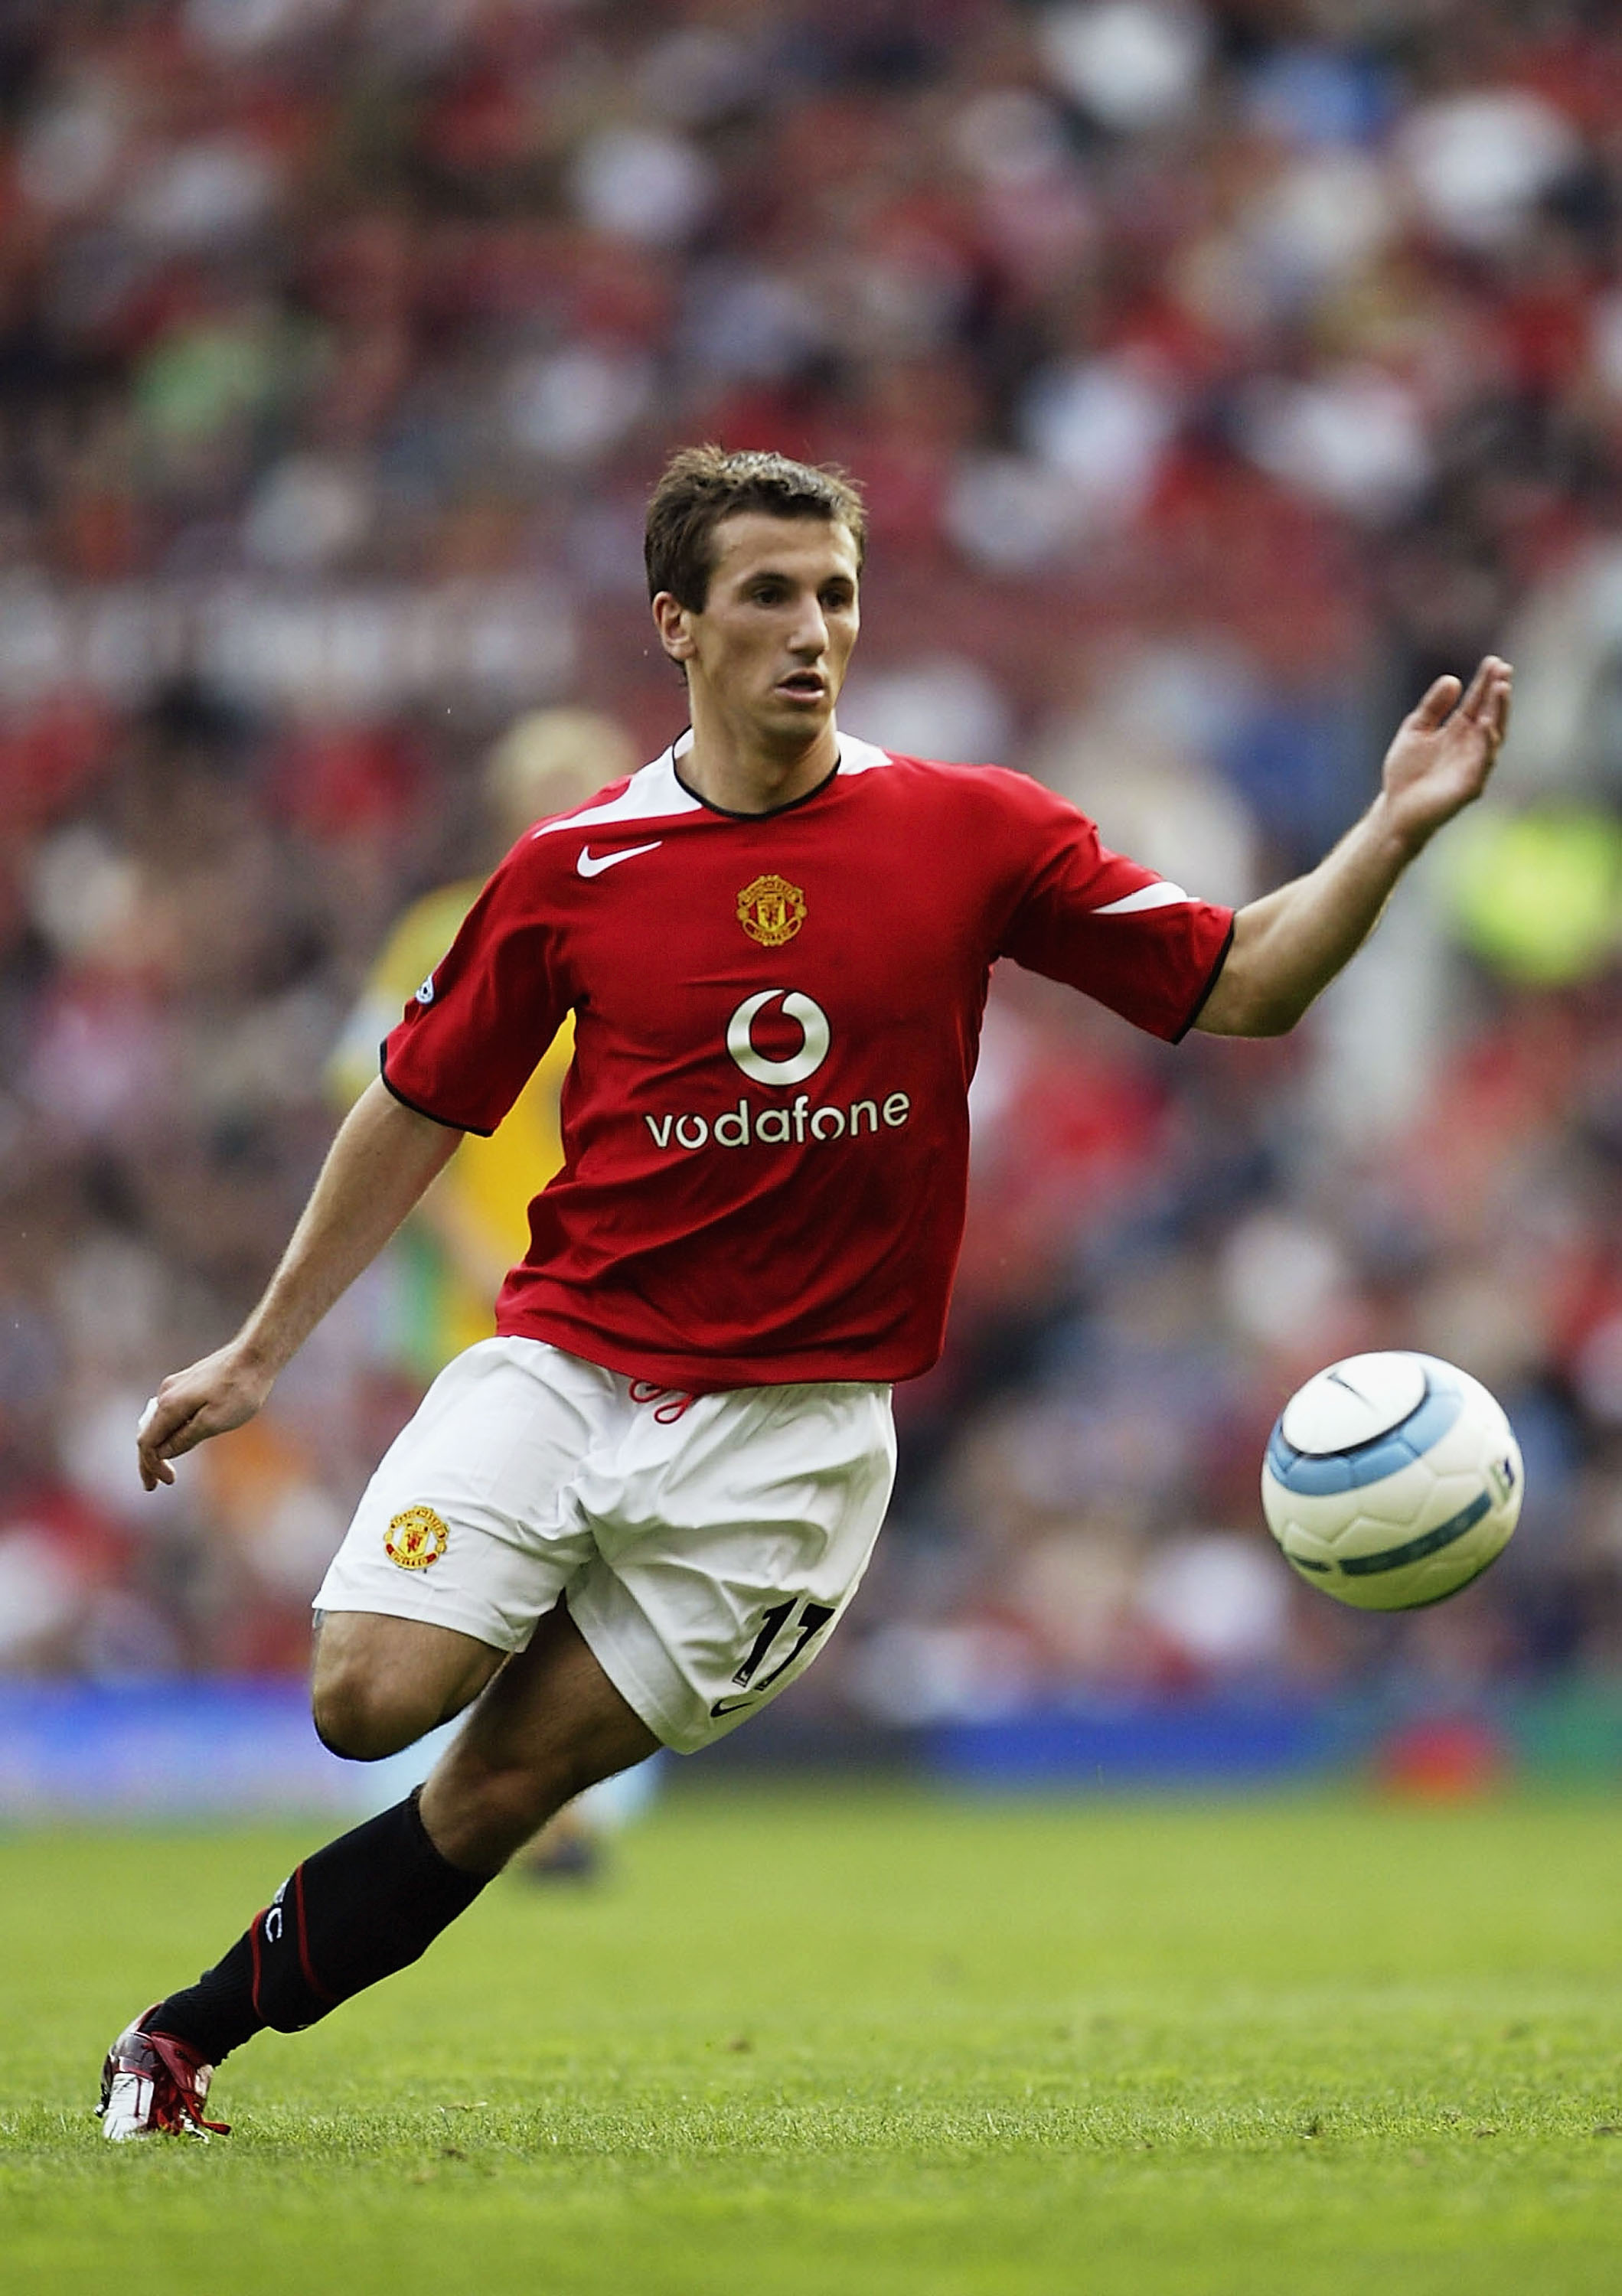 MANCHESTER, ENGLAND - AUGUST 21:  Liam Miller of Manchester United in action during the FA Barclays Premiership match between Manchester United and Norwich City at Old Trafford on August 21, 2004 in Manchester, England.  (Photo by Gary M.Prior/Getty Image